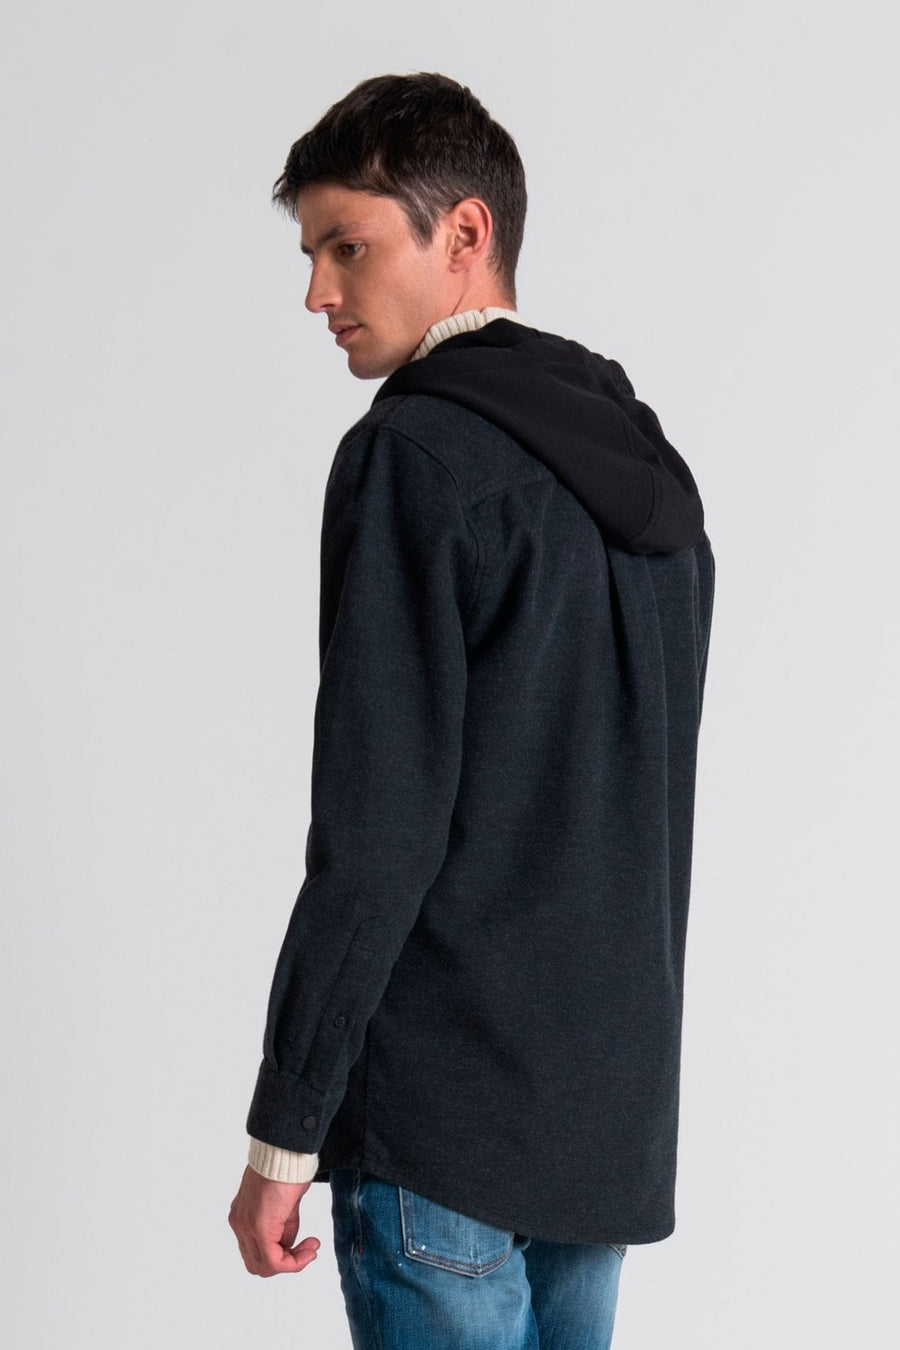 Buy the Antony Morato Hooded Overshirt Black at Intro. Spend £50 for free UK delivery. Official stockists. We ship worldwide.